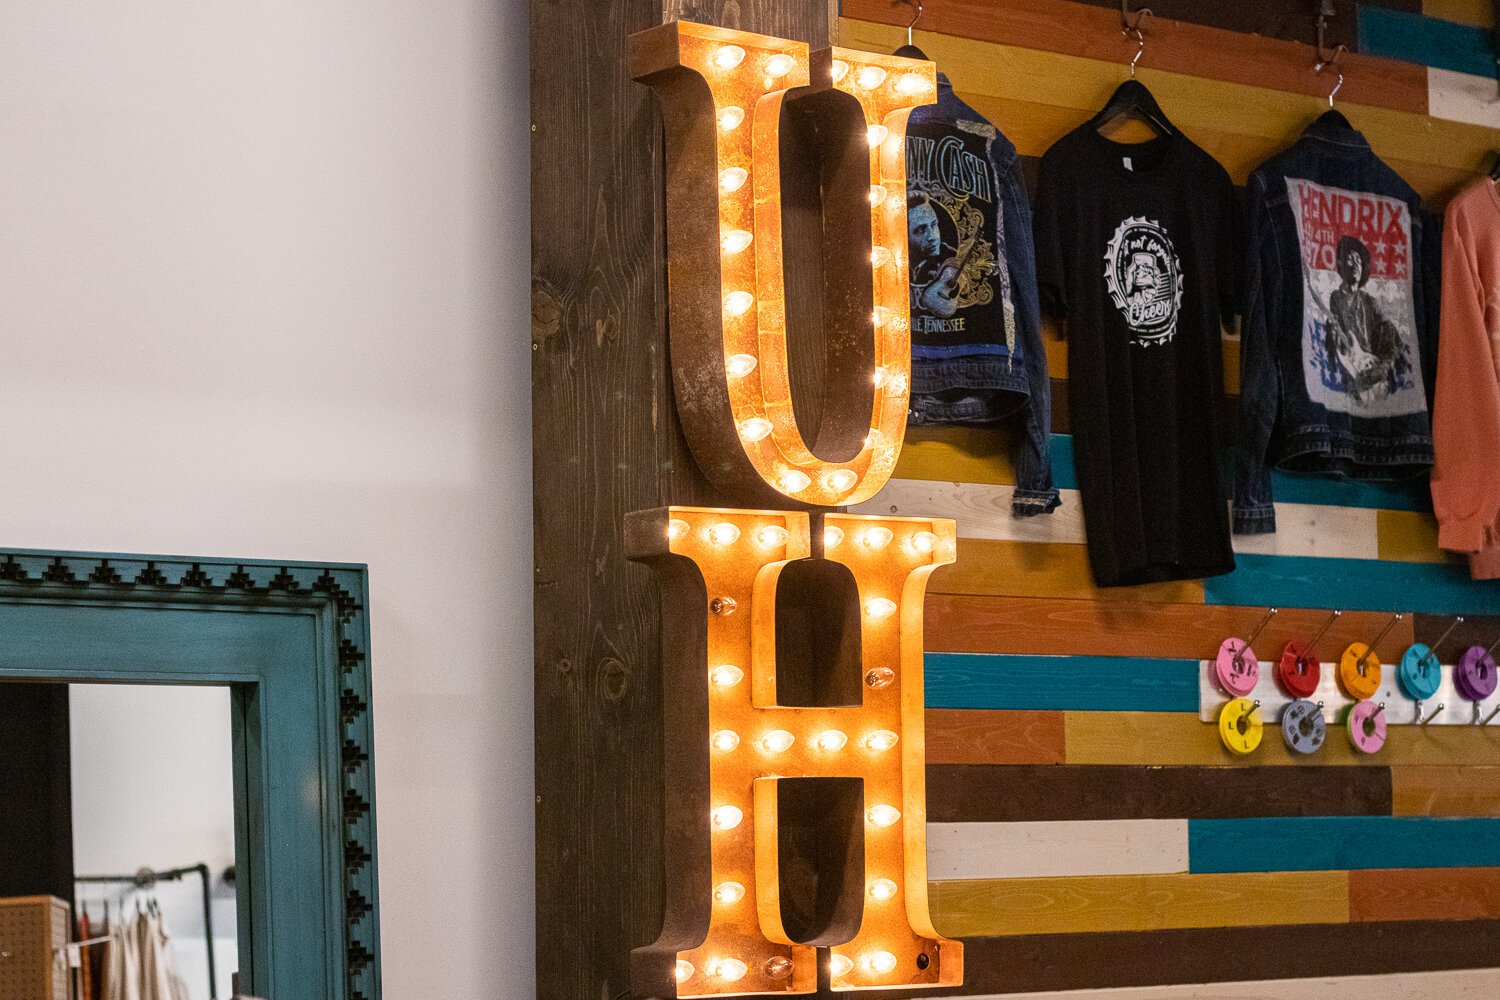 Tammy Castleberry, owner of The Urban Hippie, describes the store's space as "kitschy."